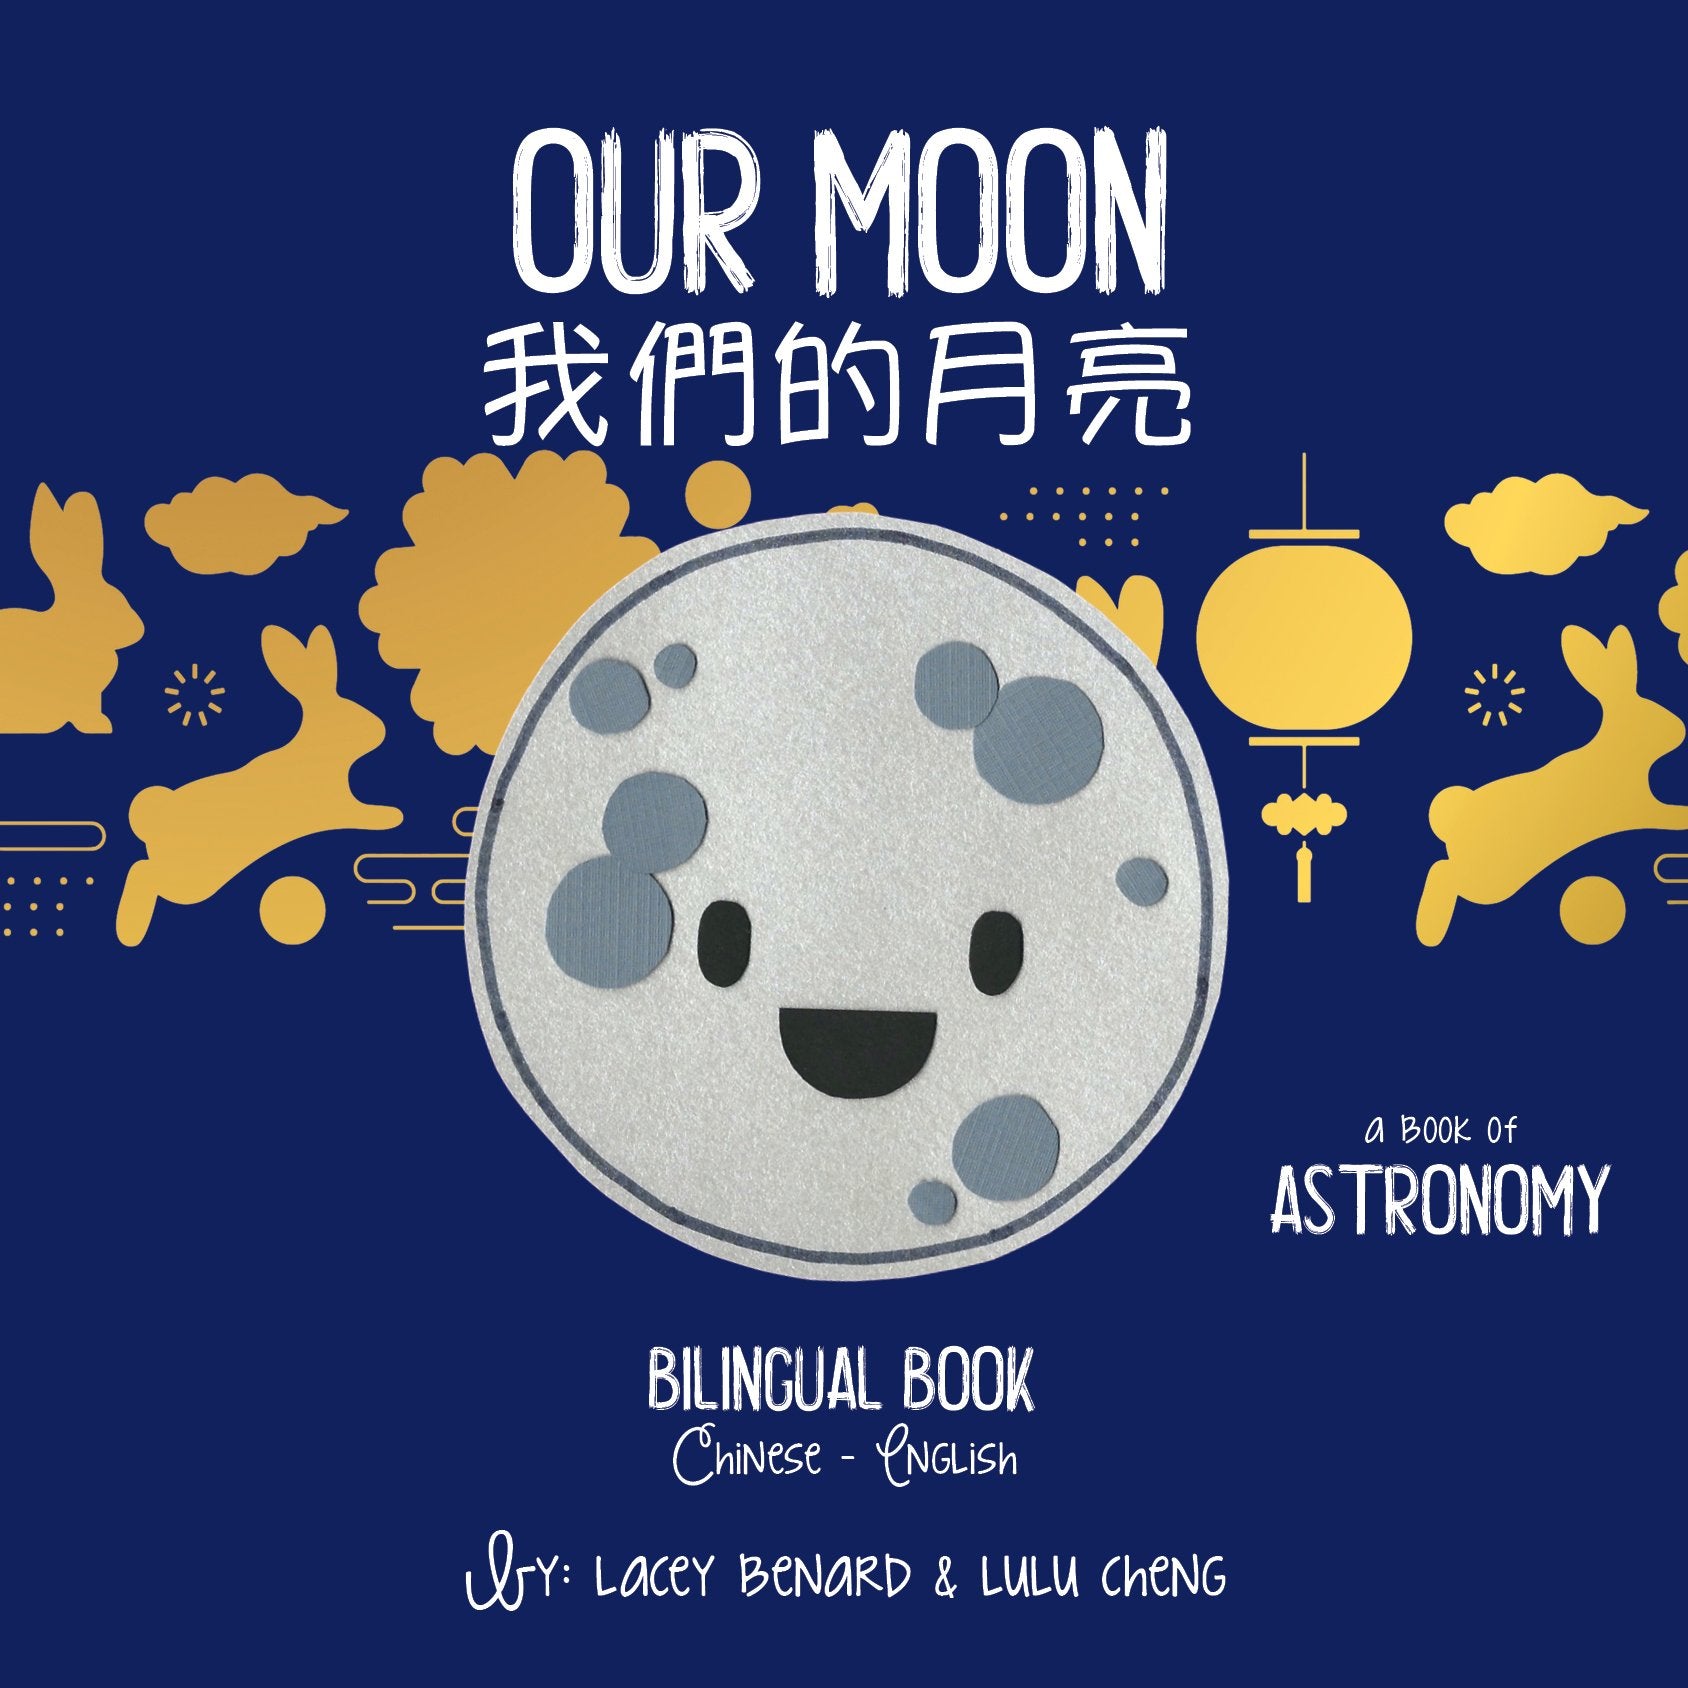 Our Moon, a book of astronomy, is a book in the Bitty Bao series for Mid-Autumn Festival written in both English and Chinese with pinyin and zhuyin.